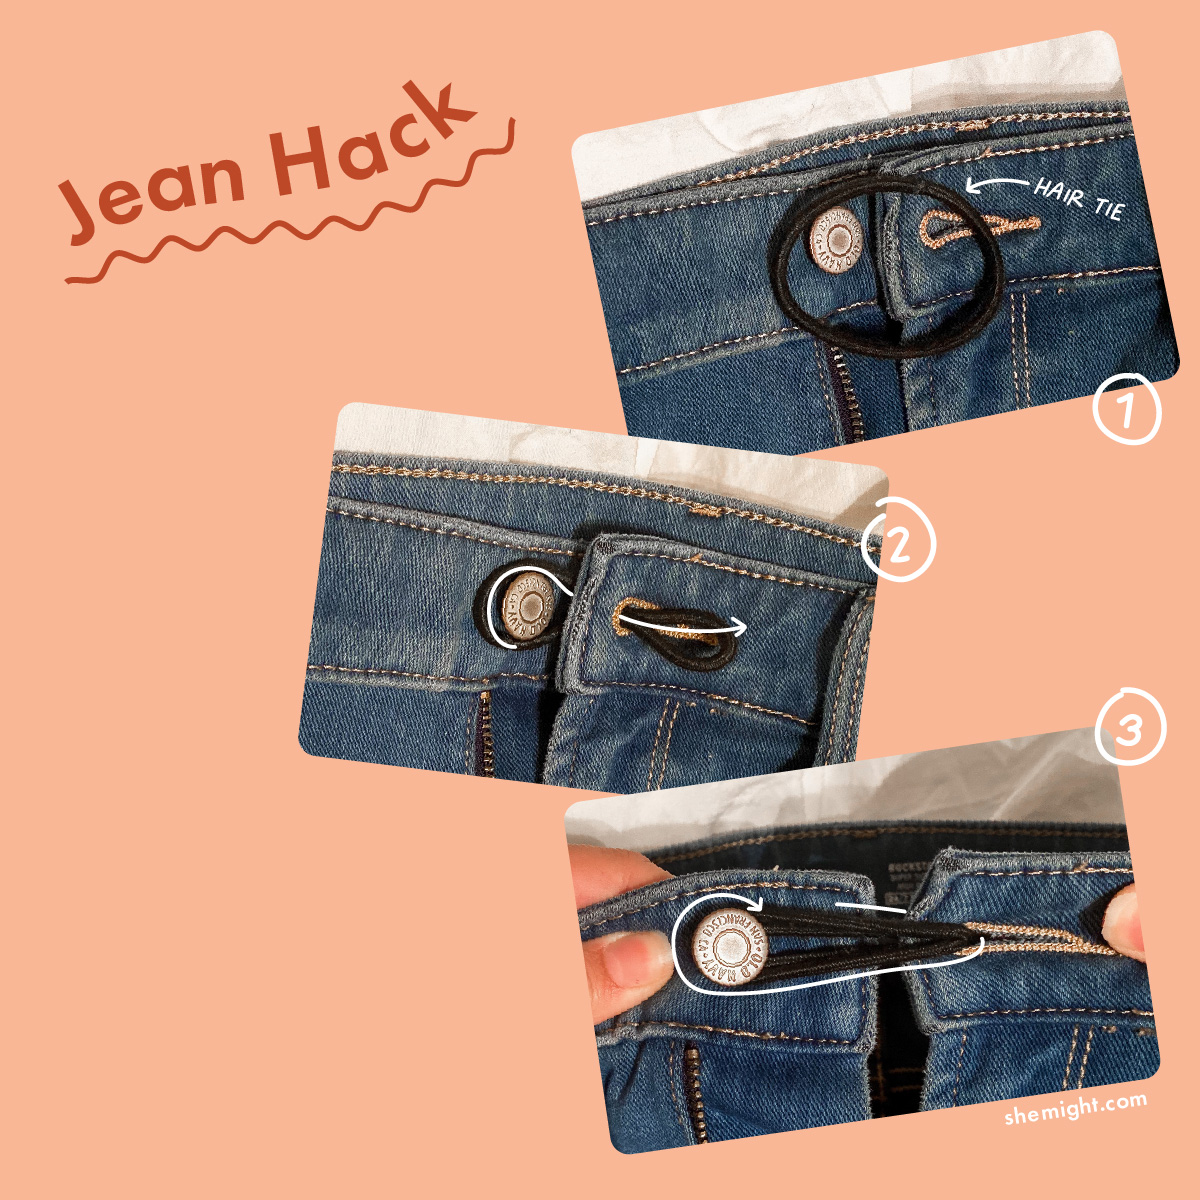 Hairband jean hack during second trimester